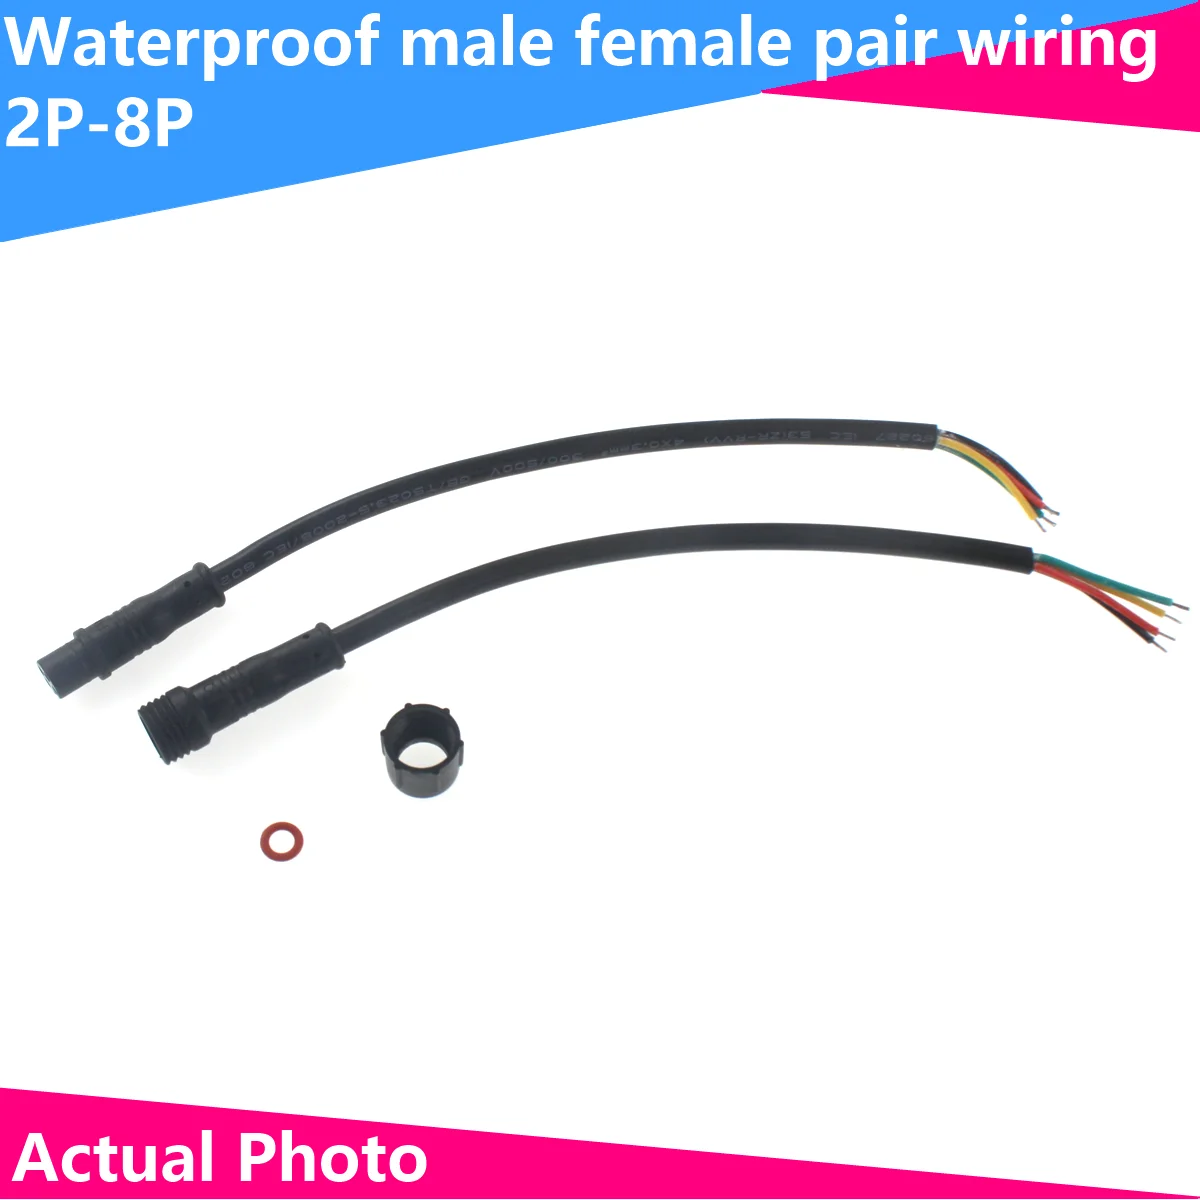 Waterproof Male Female Docking Plug 2/3/4/5/8P pin Aviation Industry Power Supply Quick Connector Outdoor LED Wire Socket AWG choose f or m xs16j2p xs16j3p xs16j4p xs16j5p xs16j7p xs16 2 3 4 5 7 prong pin socket connector aviation plug tig welding torch